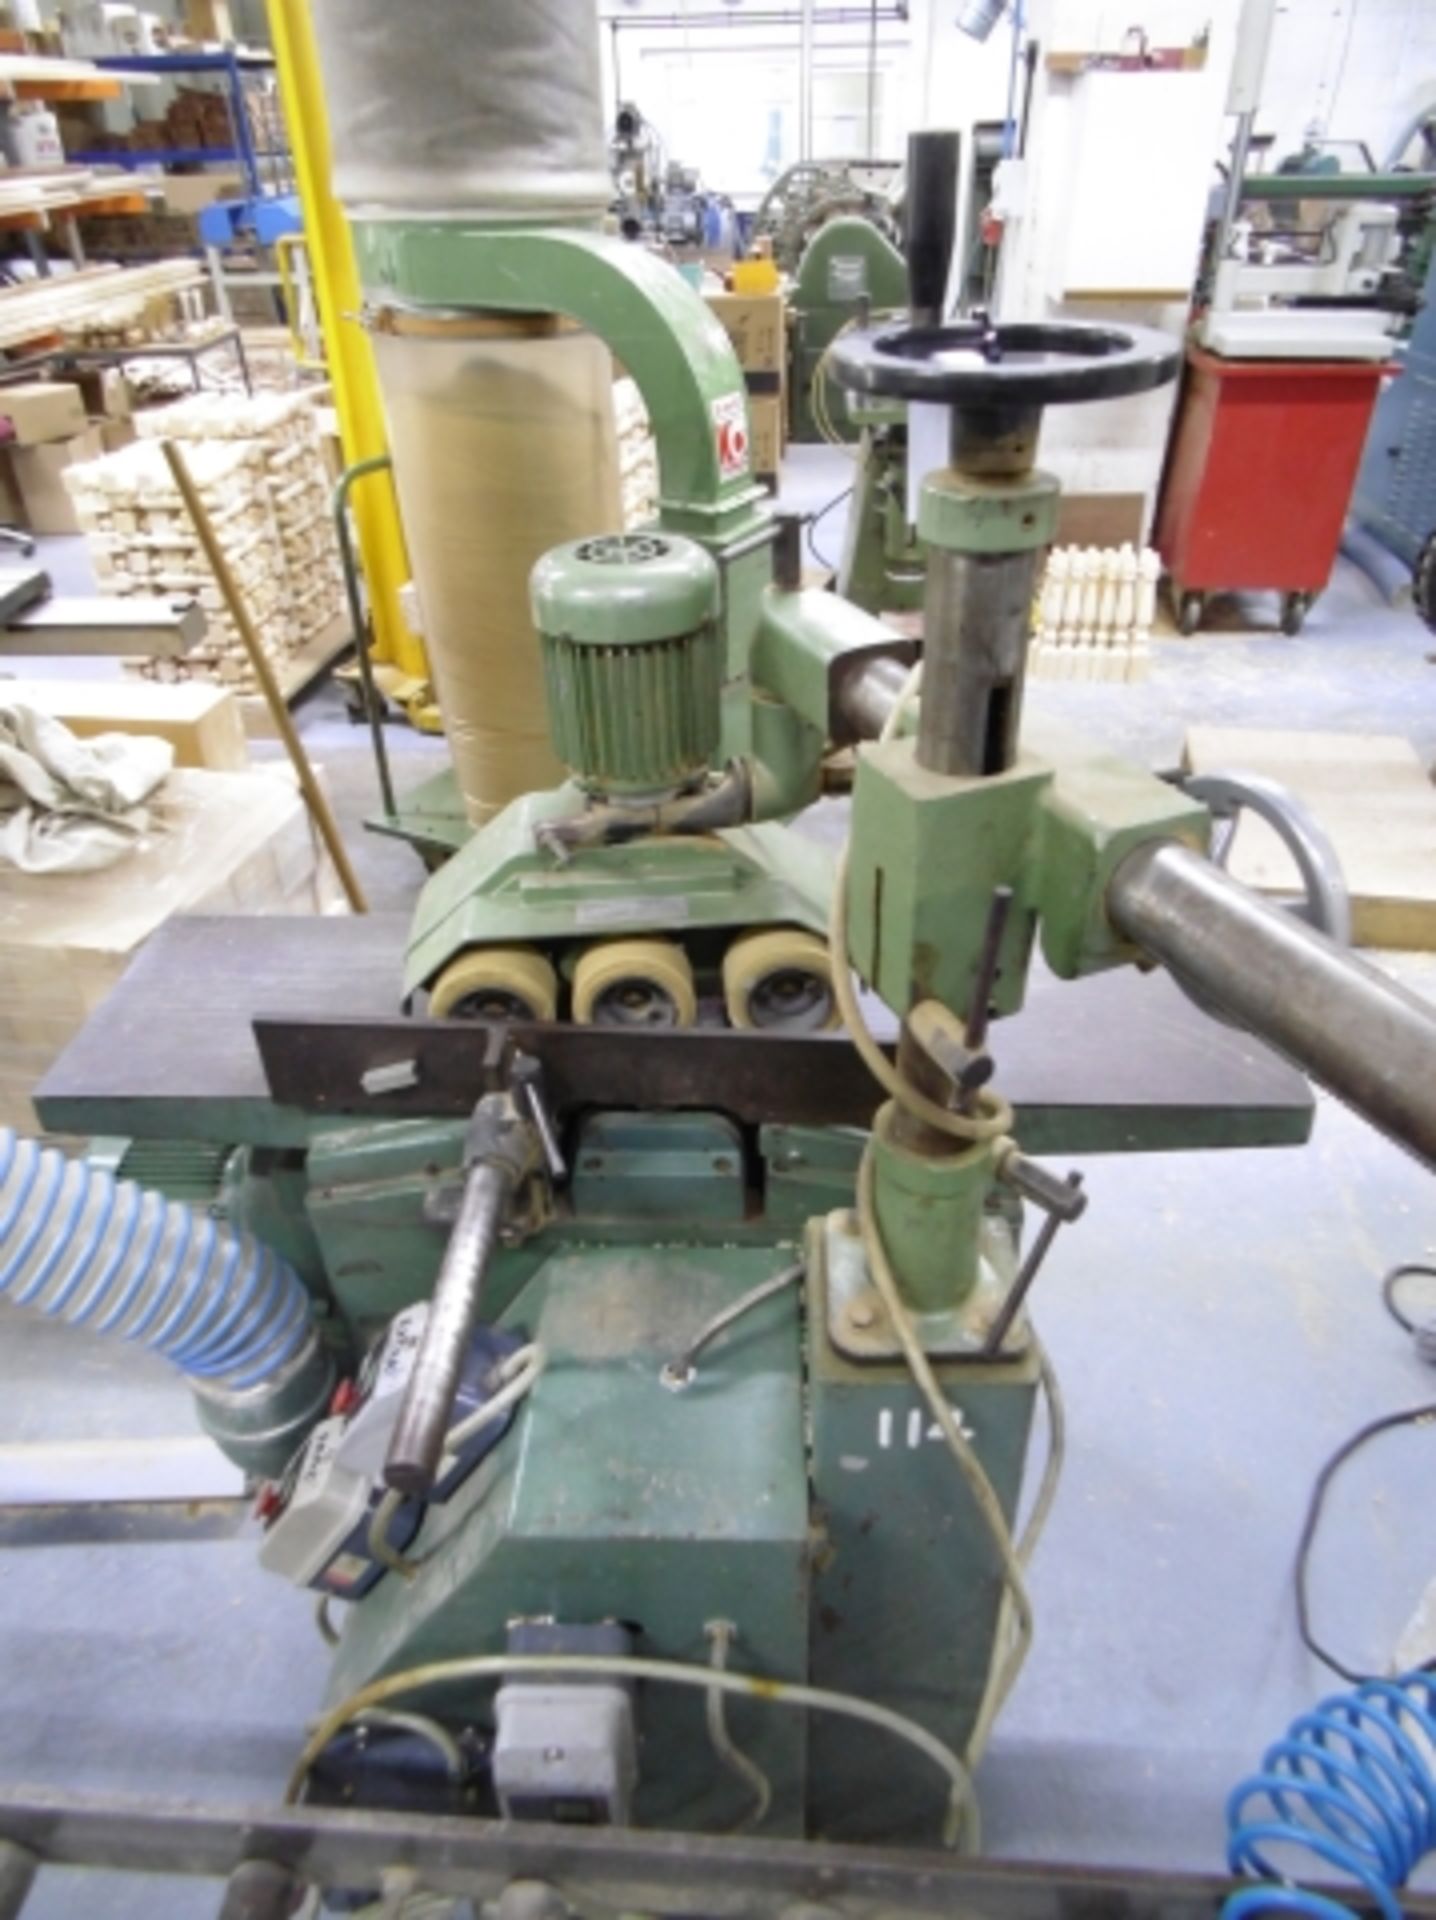 * Europa LN300 Bottom Belt Sander with Samco Power Feed. 300mm wide belt and 1230mm table length. - Image 5 of 5